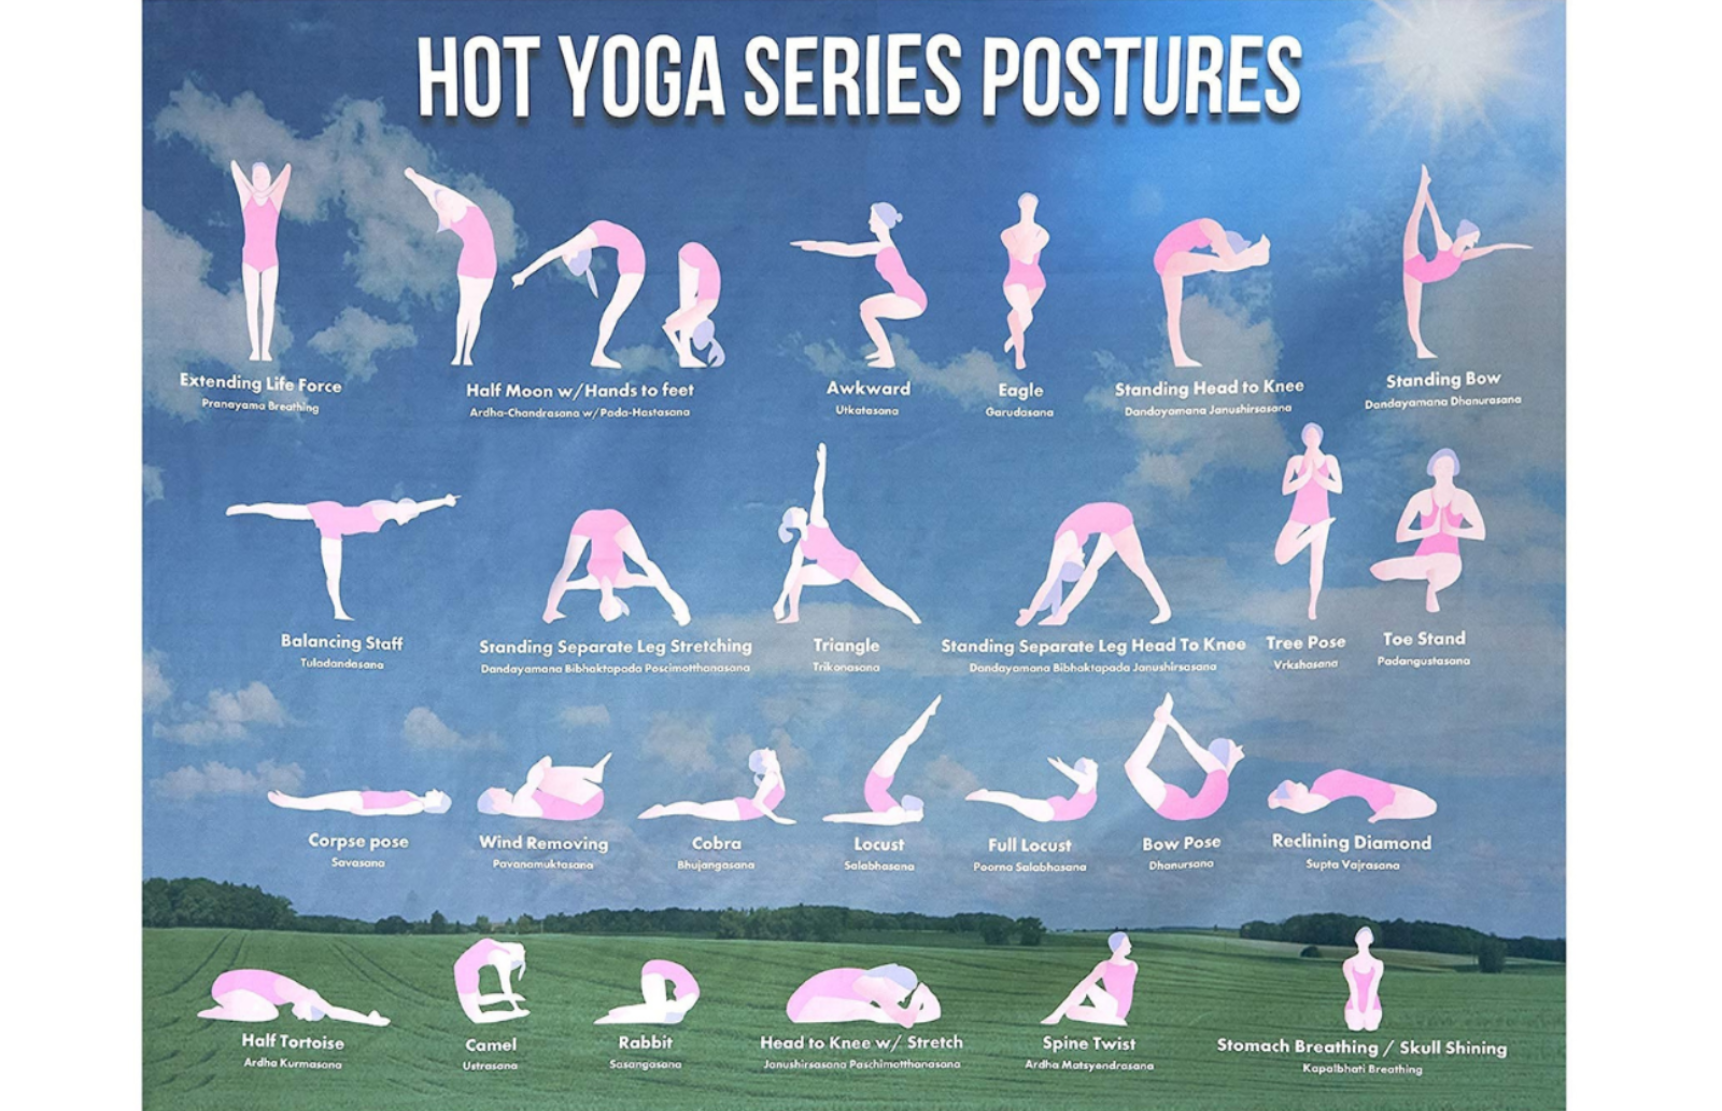 Hot Yoga Tapestry and Bikram Asana Poster/3'x4' sequence tutorial